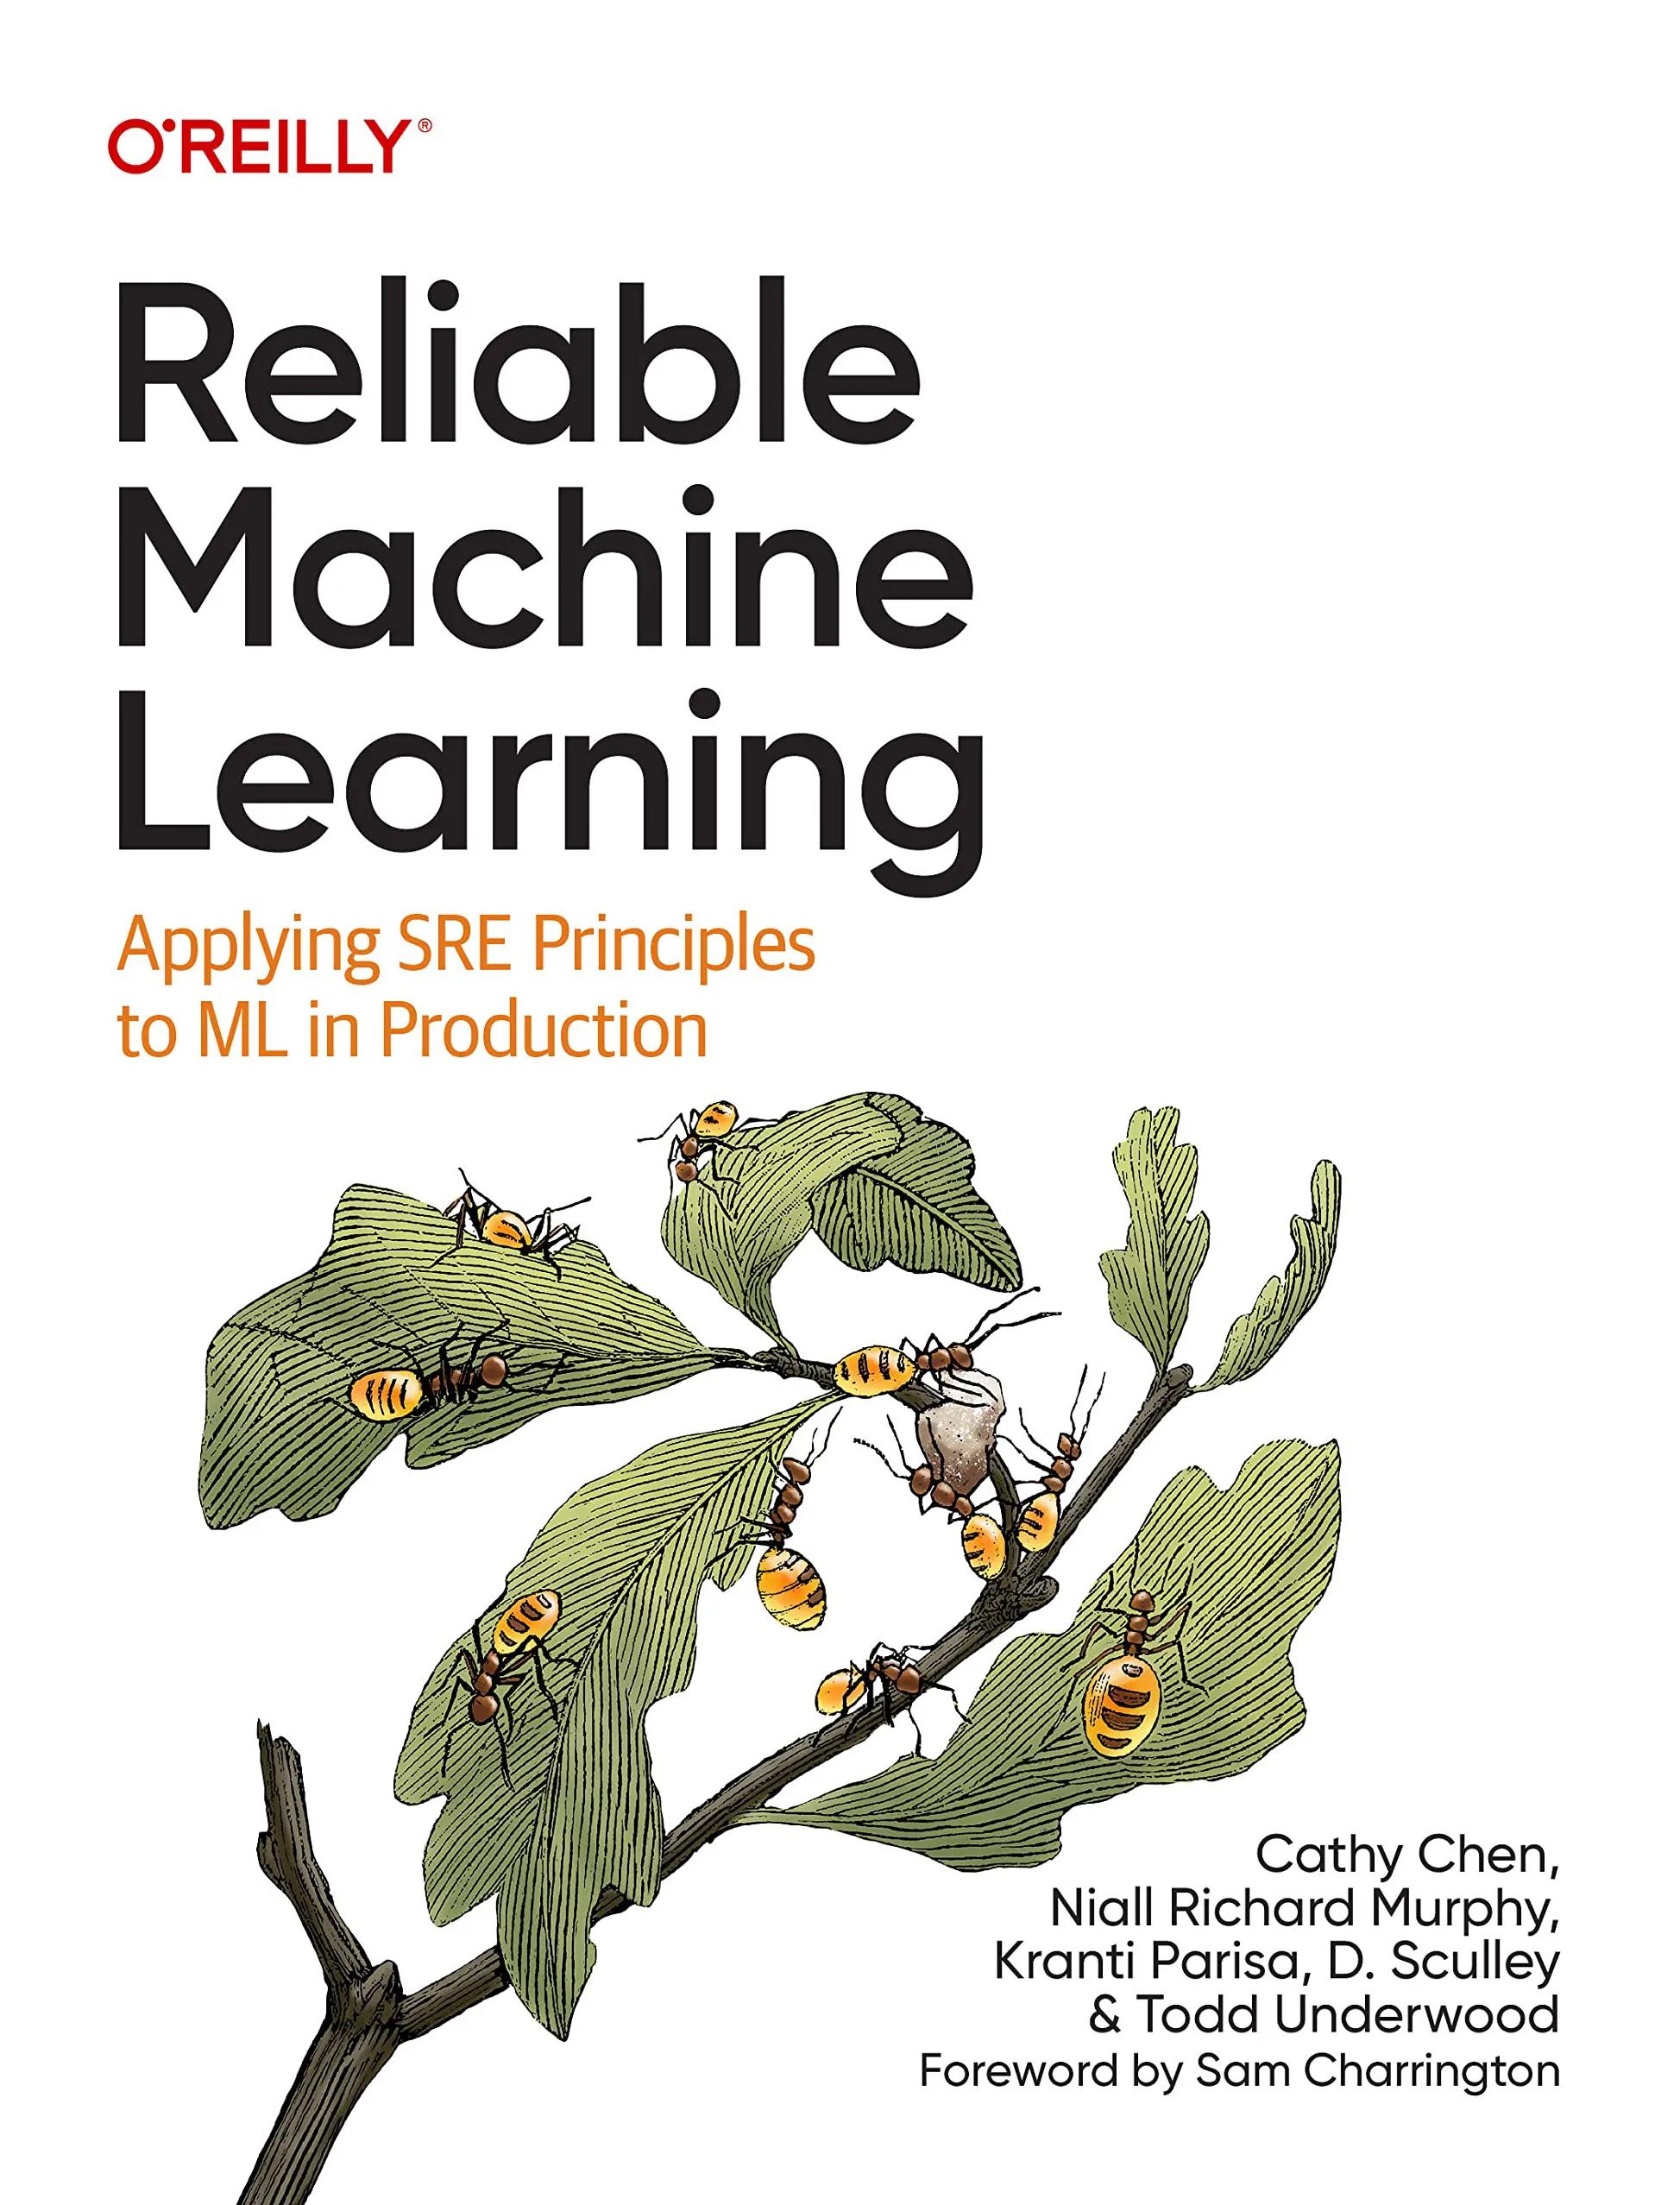 “Reliable Machine Learning”, C. Chen, N.R. Murphy, K. Parisa, D. Sculley & T. Underwood